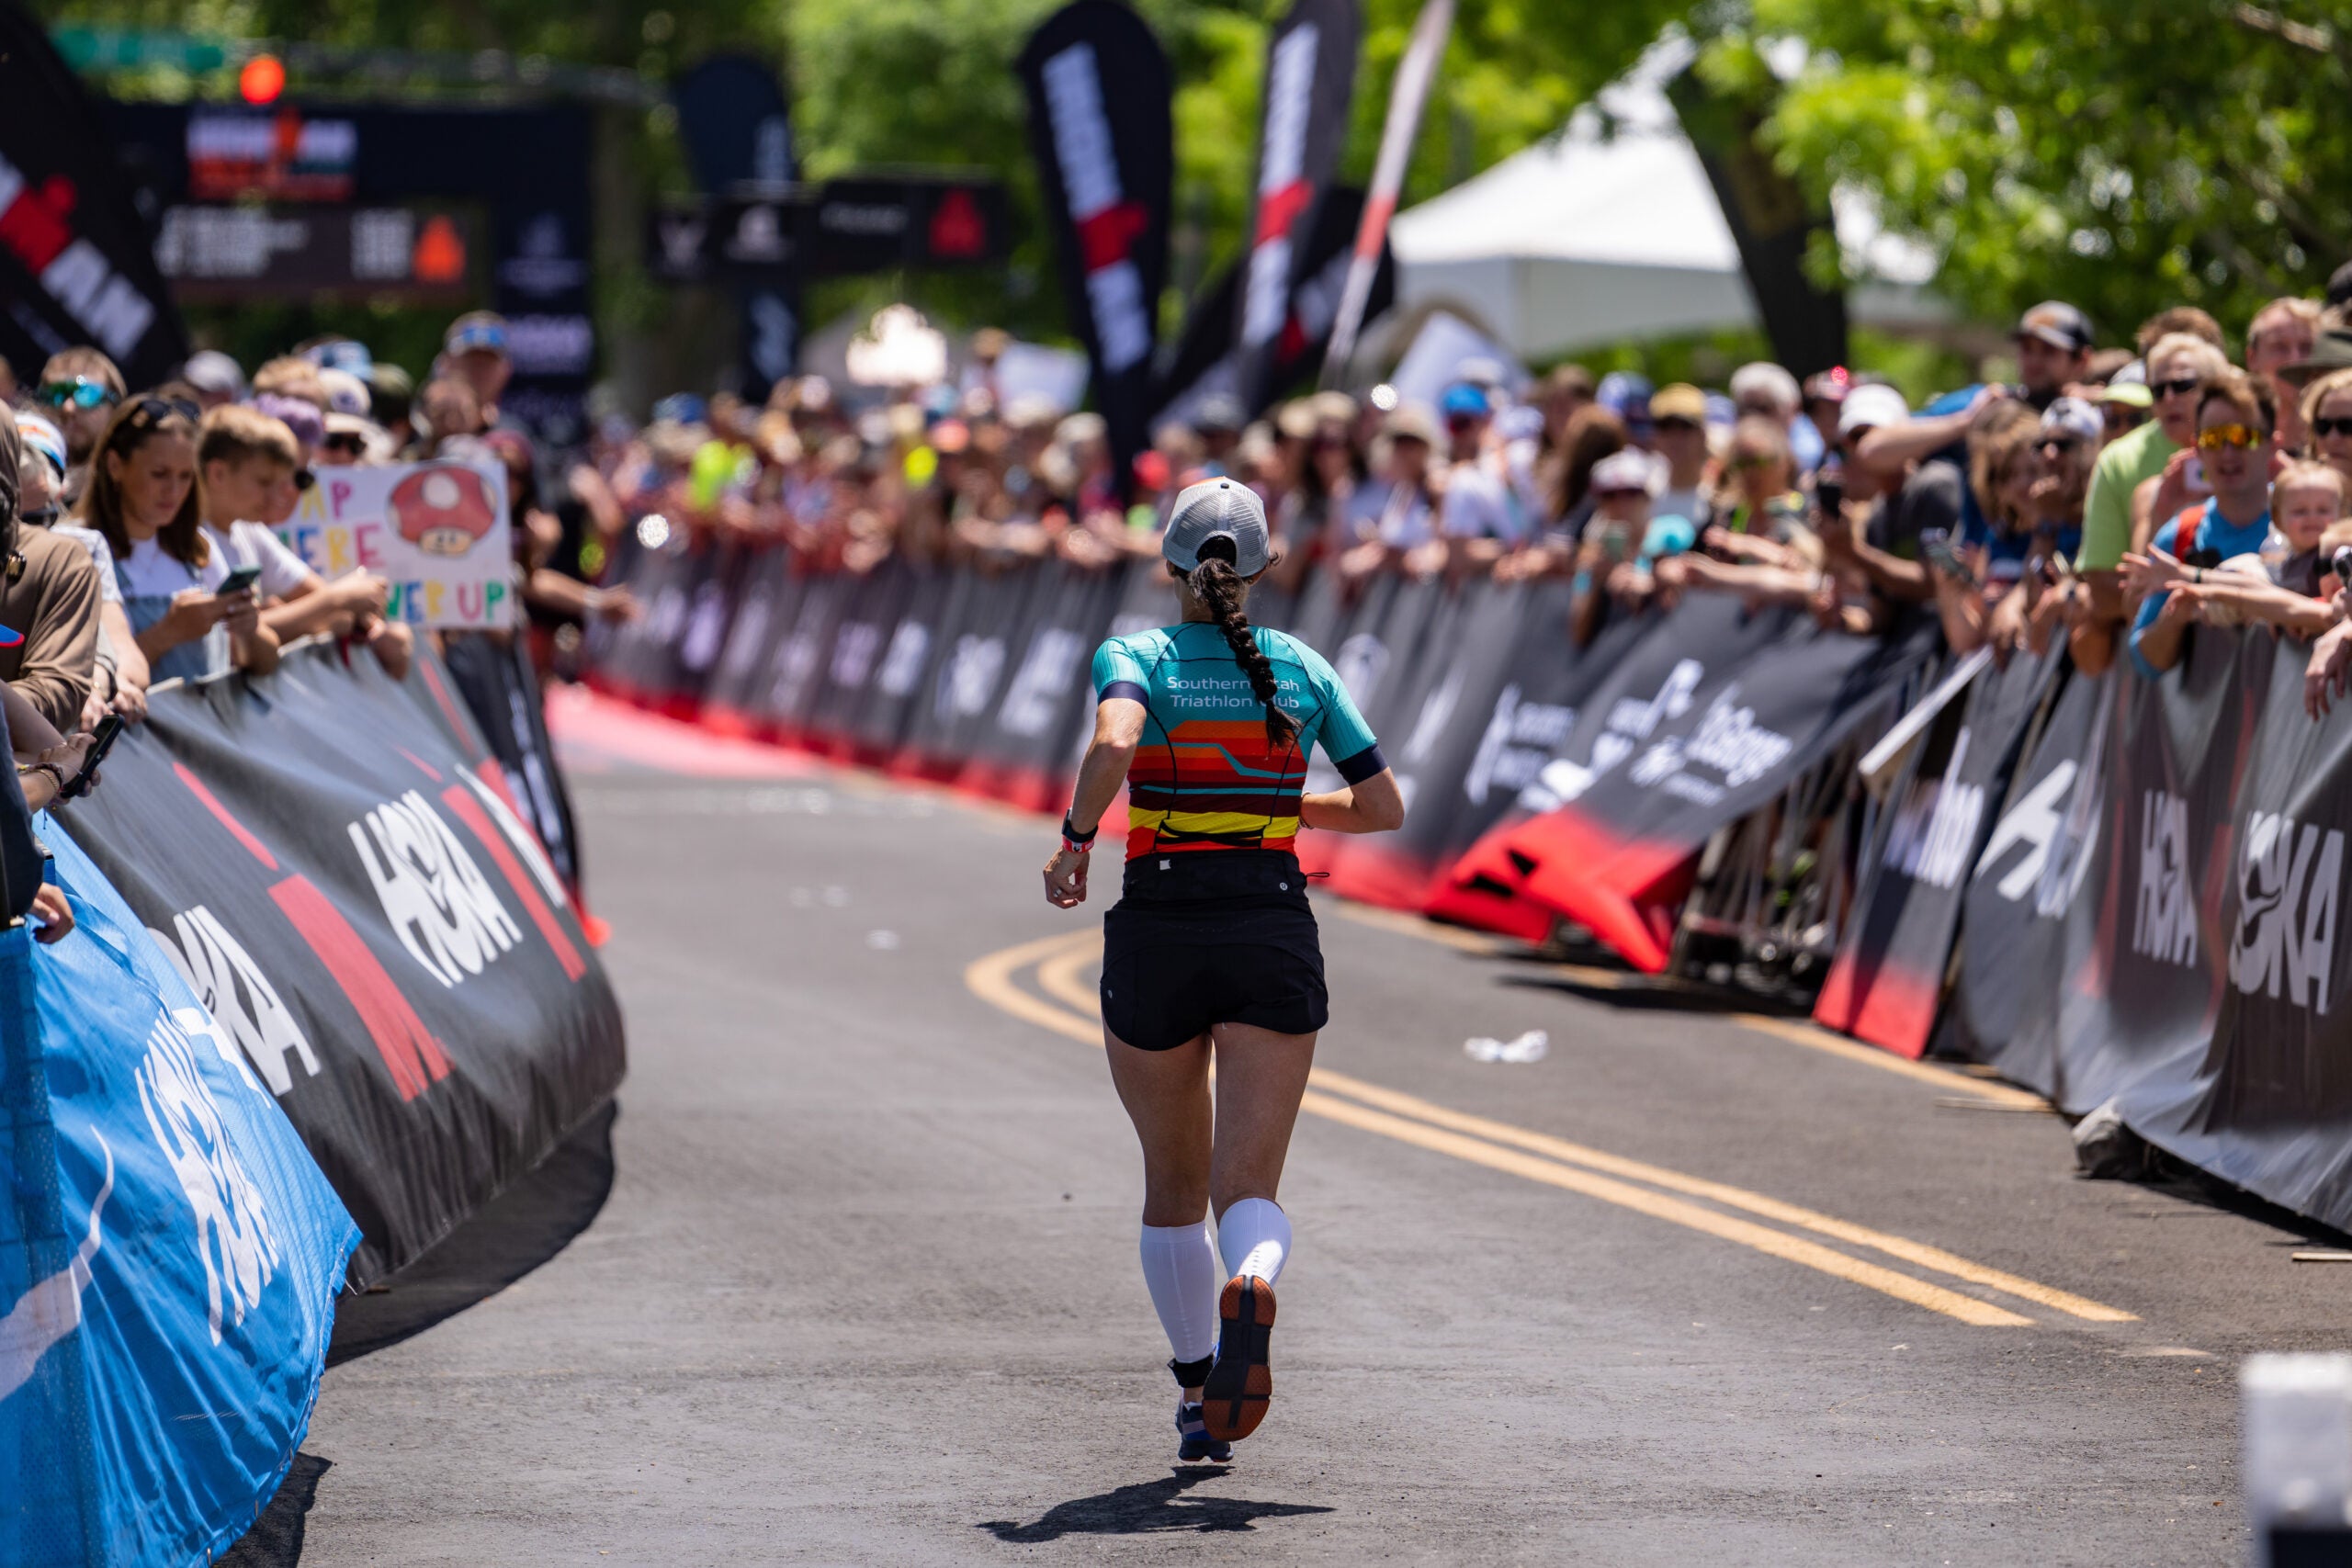 What's a good finishing time for a triathlon? A triathlete wonders as she runs to the finish line.